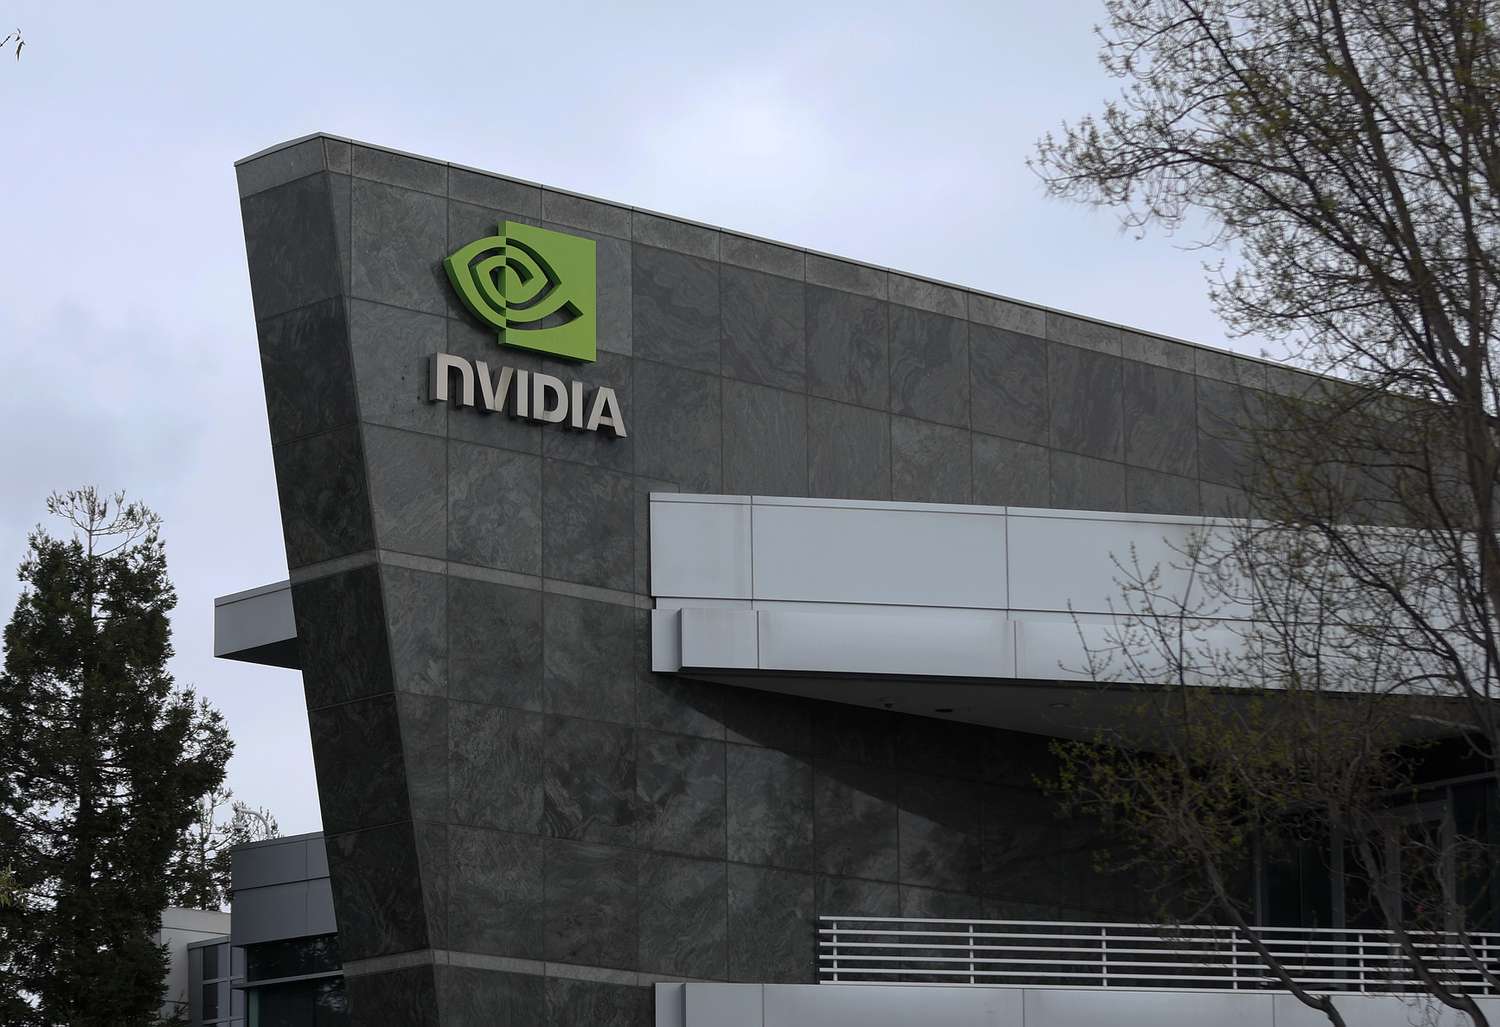 Intel, Google, Arm join forces against Nvidia's dominance with open source.